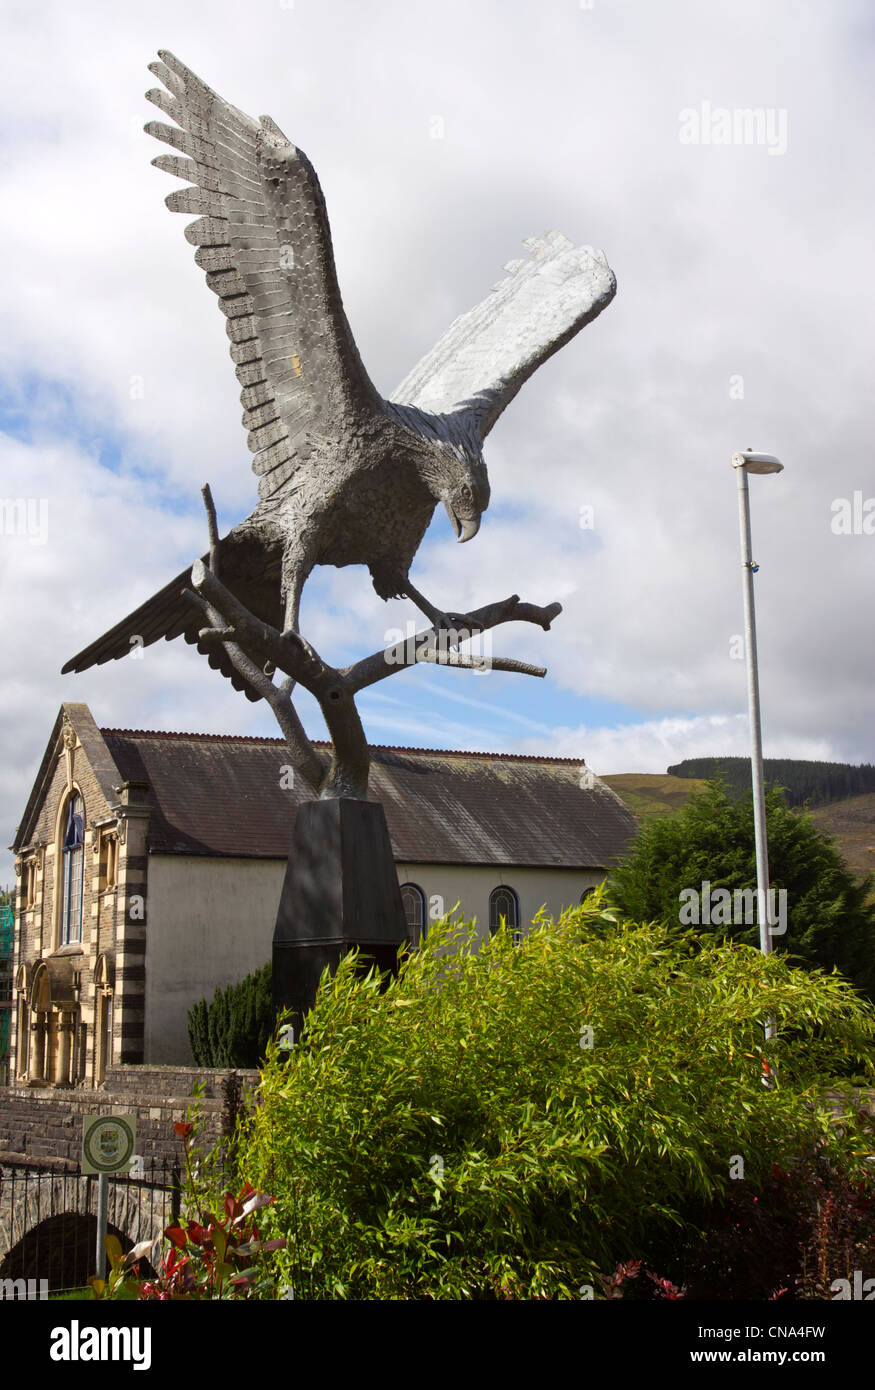 Red Kite sculpture, 'Spirit in the Sky' in Llanwrtyd Wells, Powys Wales UK. Stock Photo